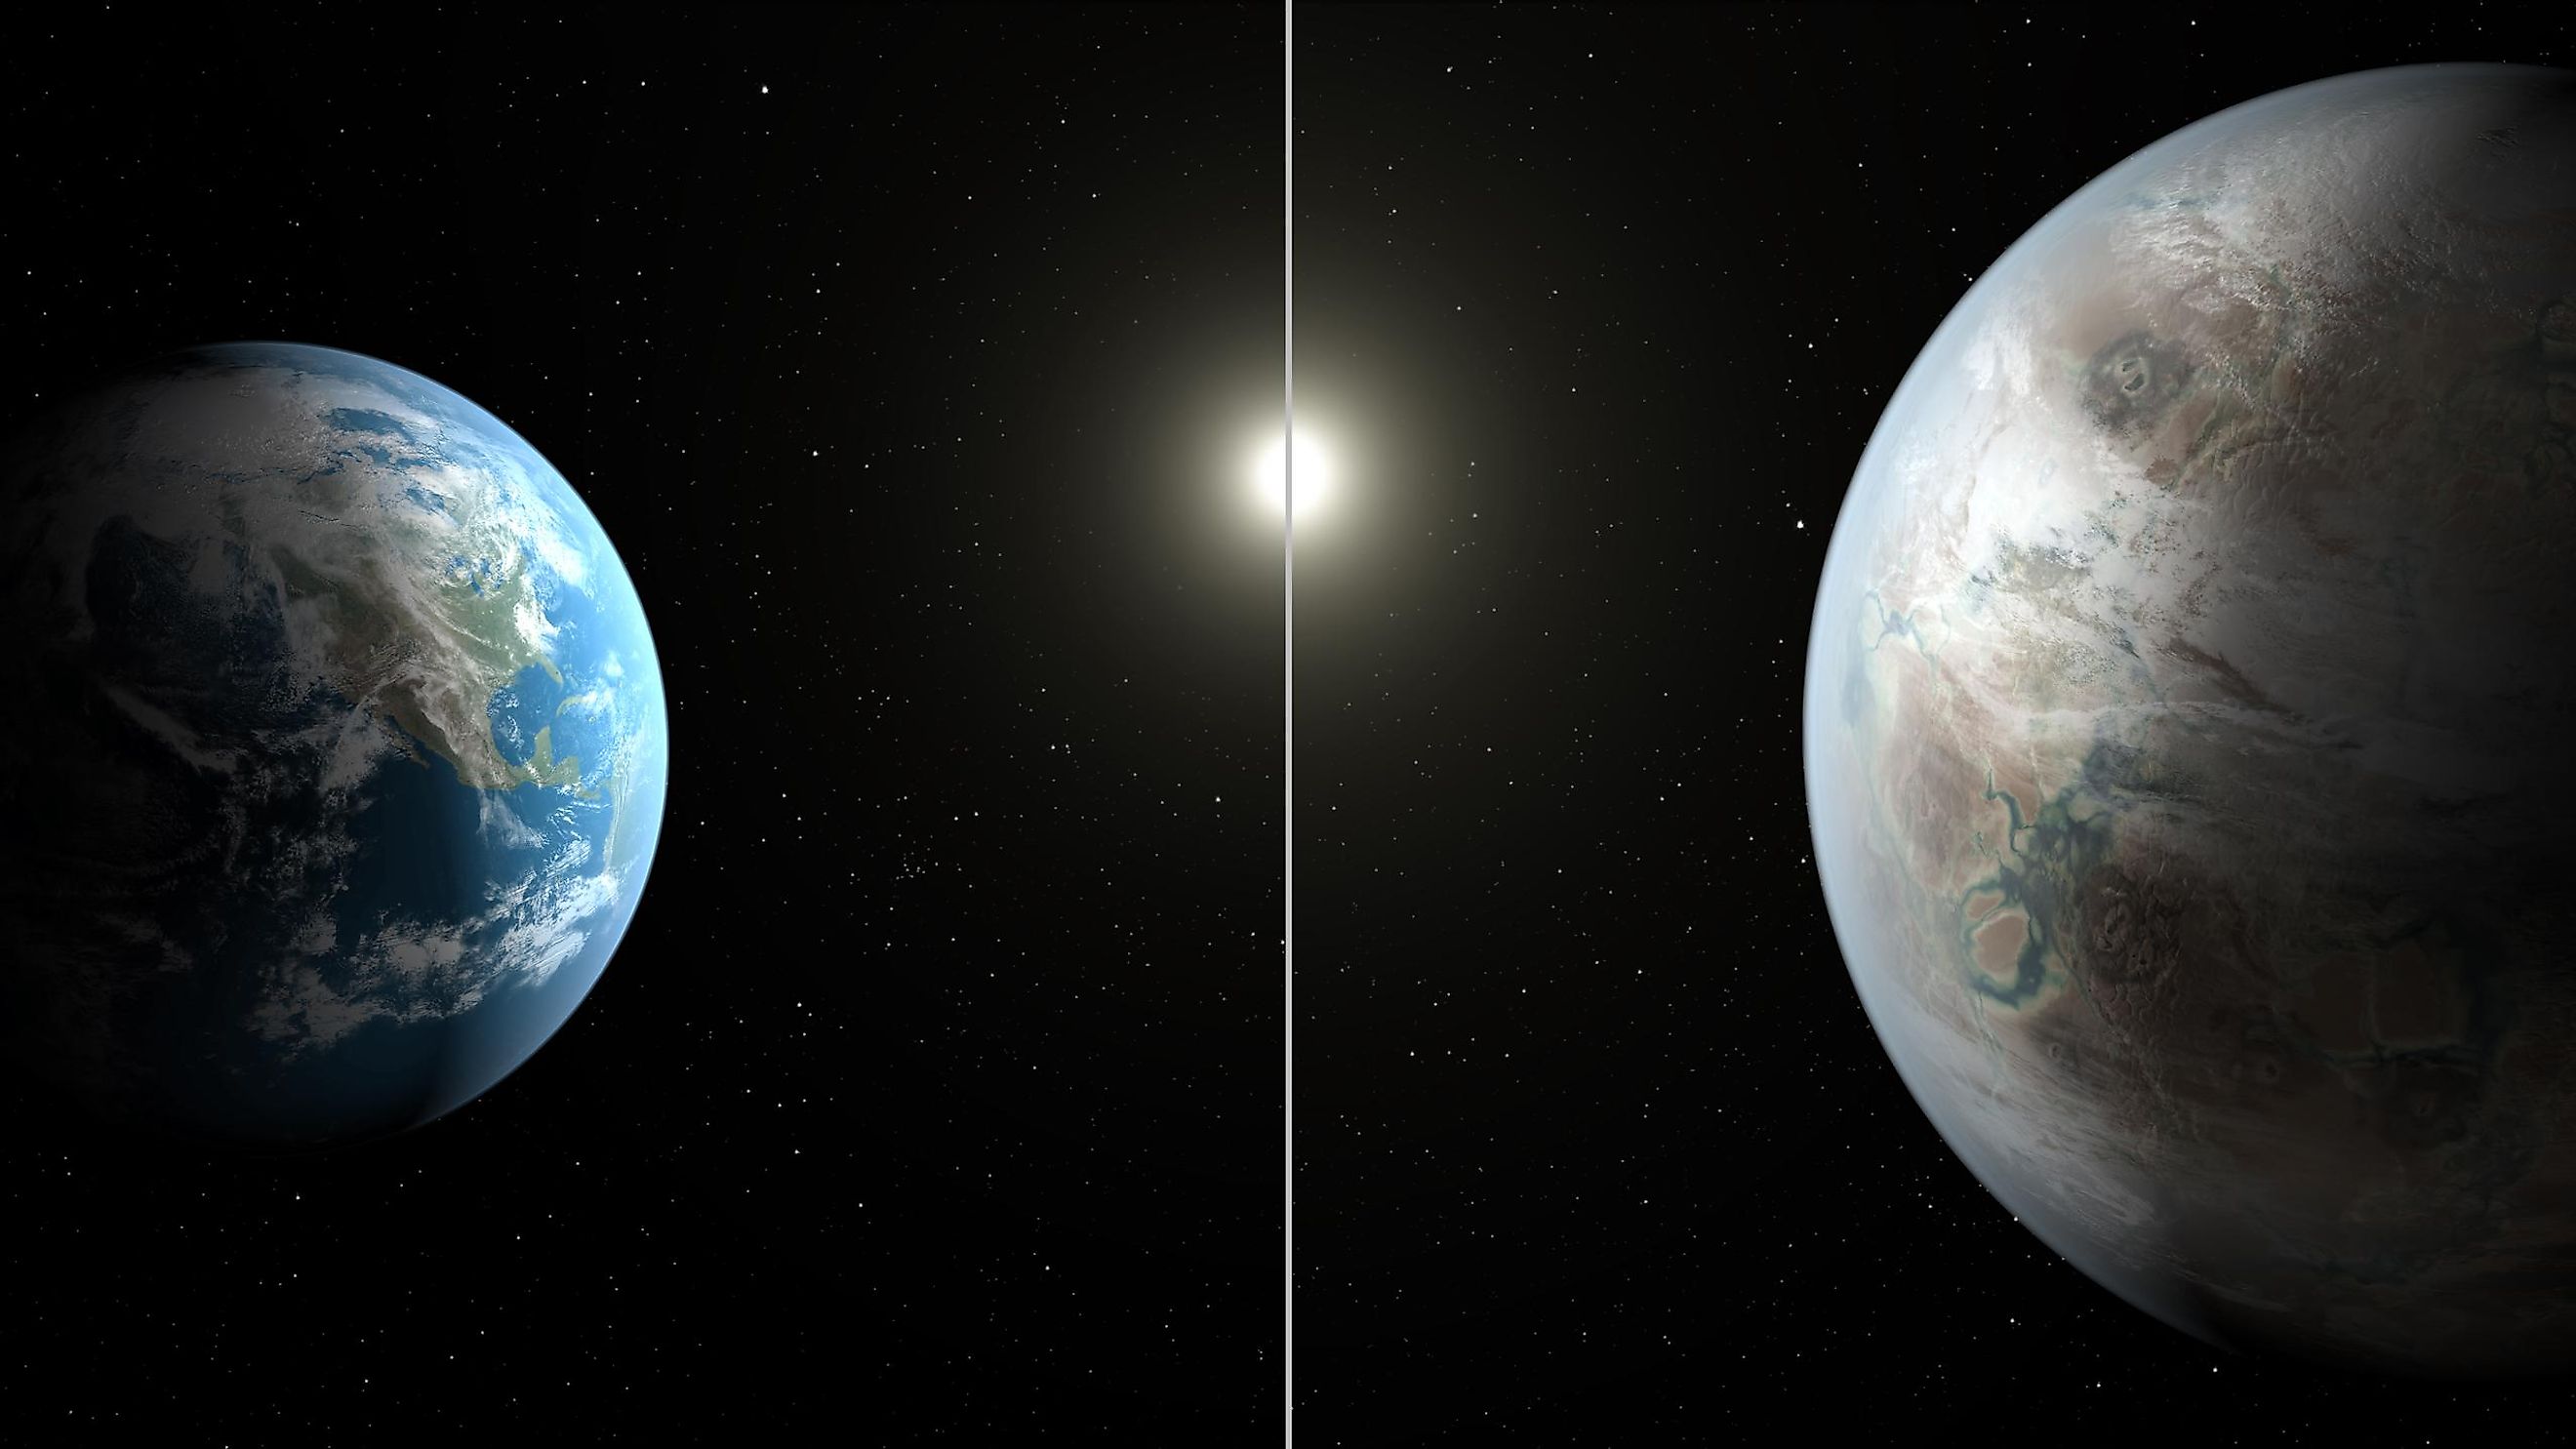 An Illustration of Earth Vs. Kepler 452-b (an exoplanet which is about 60% larger than Earth)